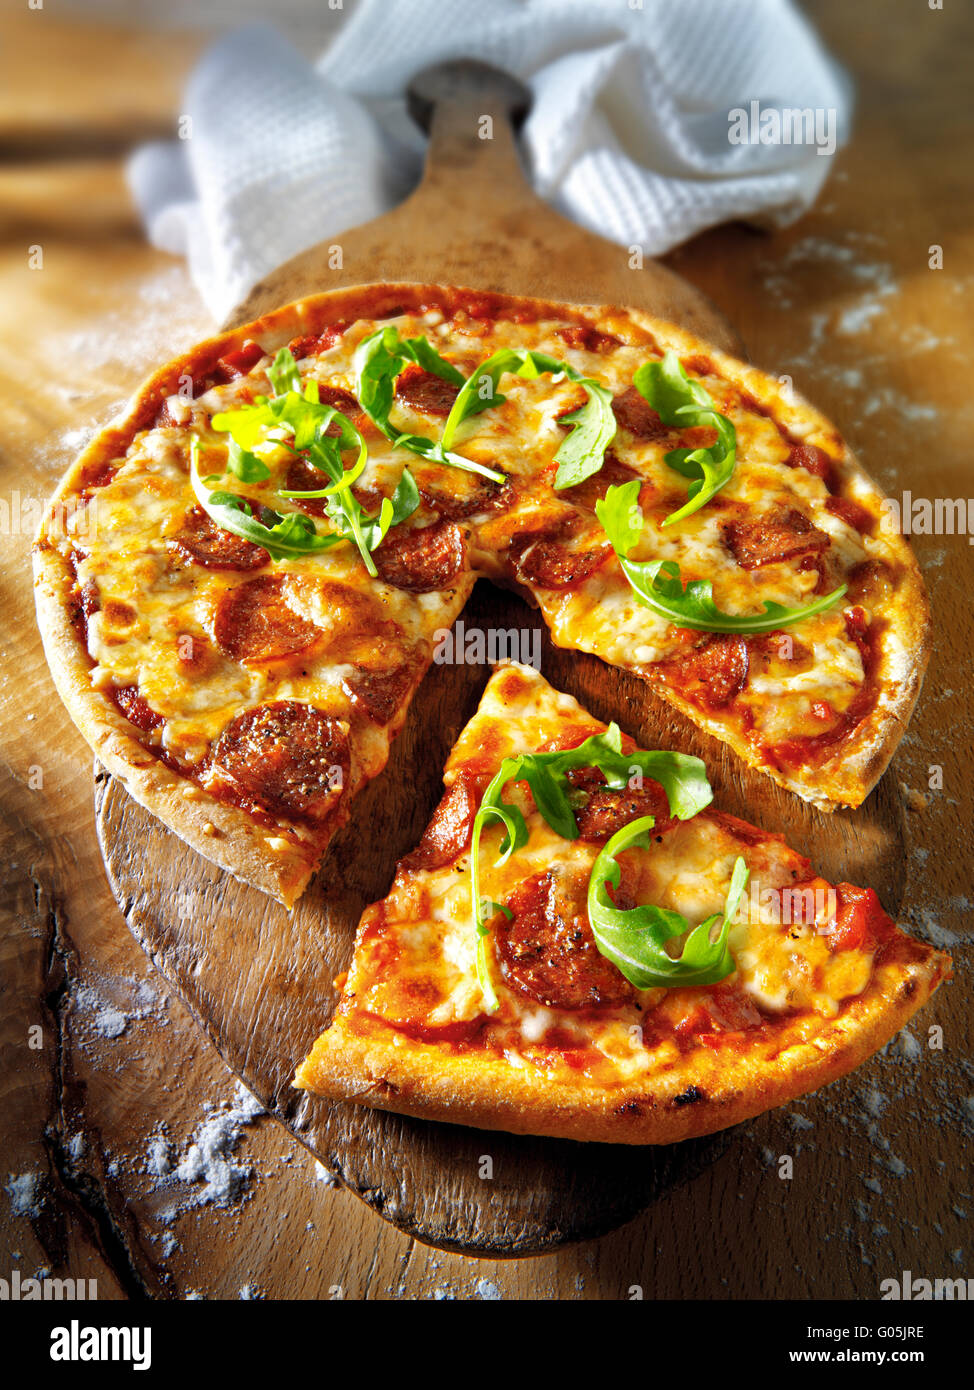 Cooked whole cheese and tomato pepperoni pizza with rocket and a cut slice Stock Photo